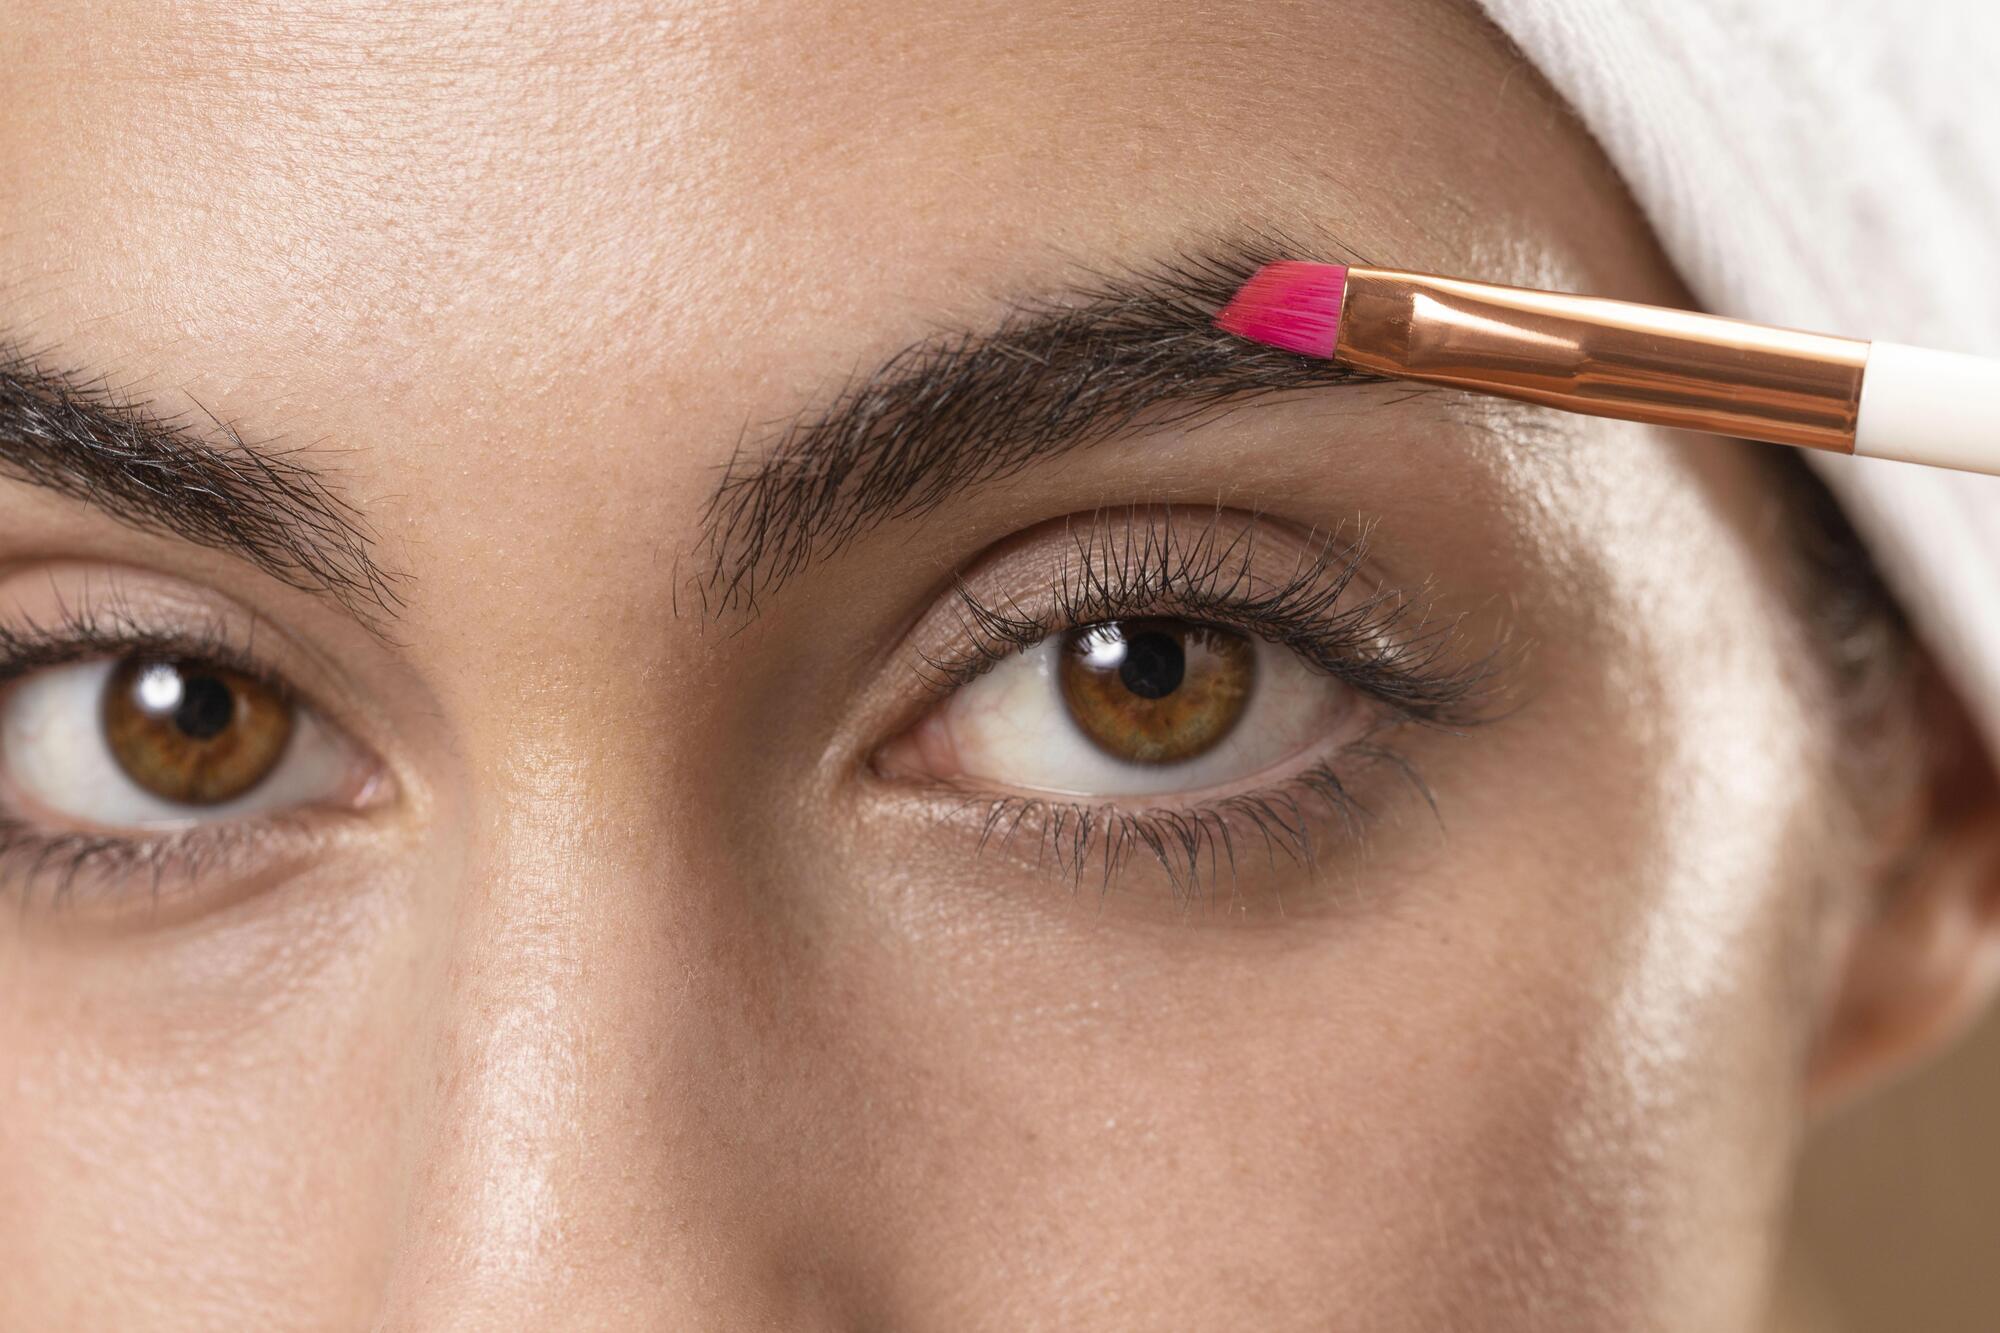 Makeup for beginners: a celebrity makeup artist shares 8 important tips